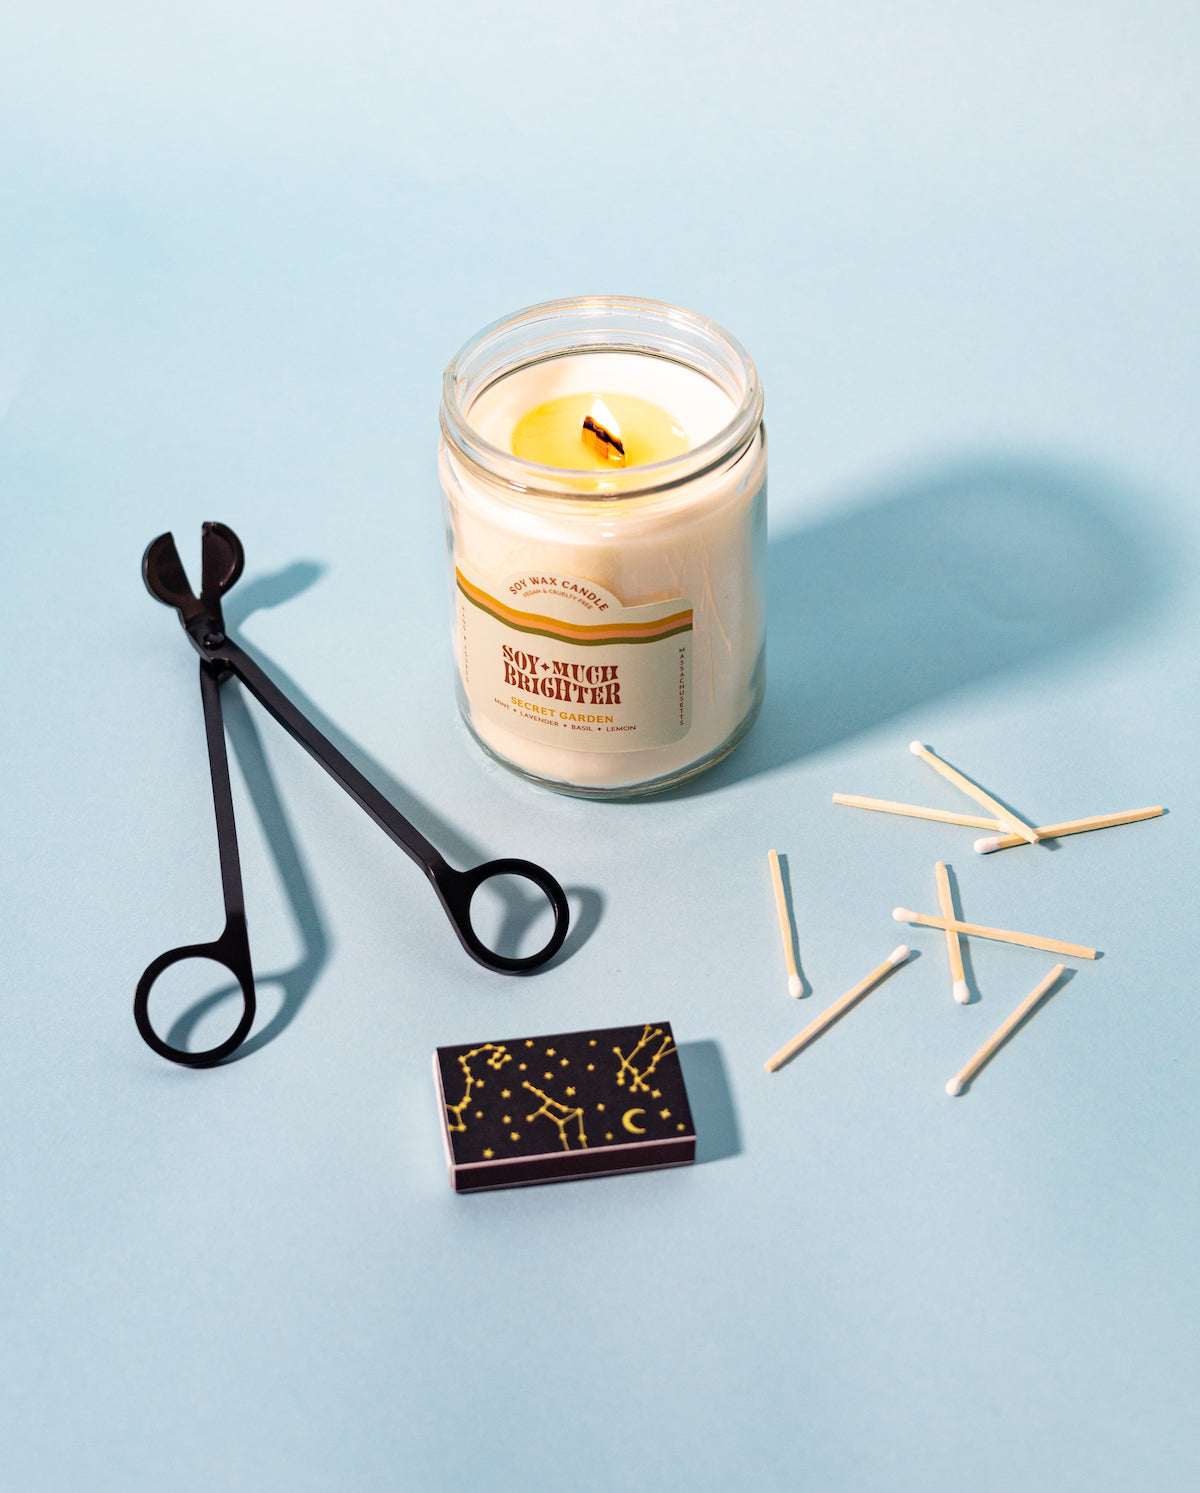 Candle Accessories including wix dipper, wix trimmer, and candle tray